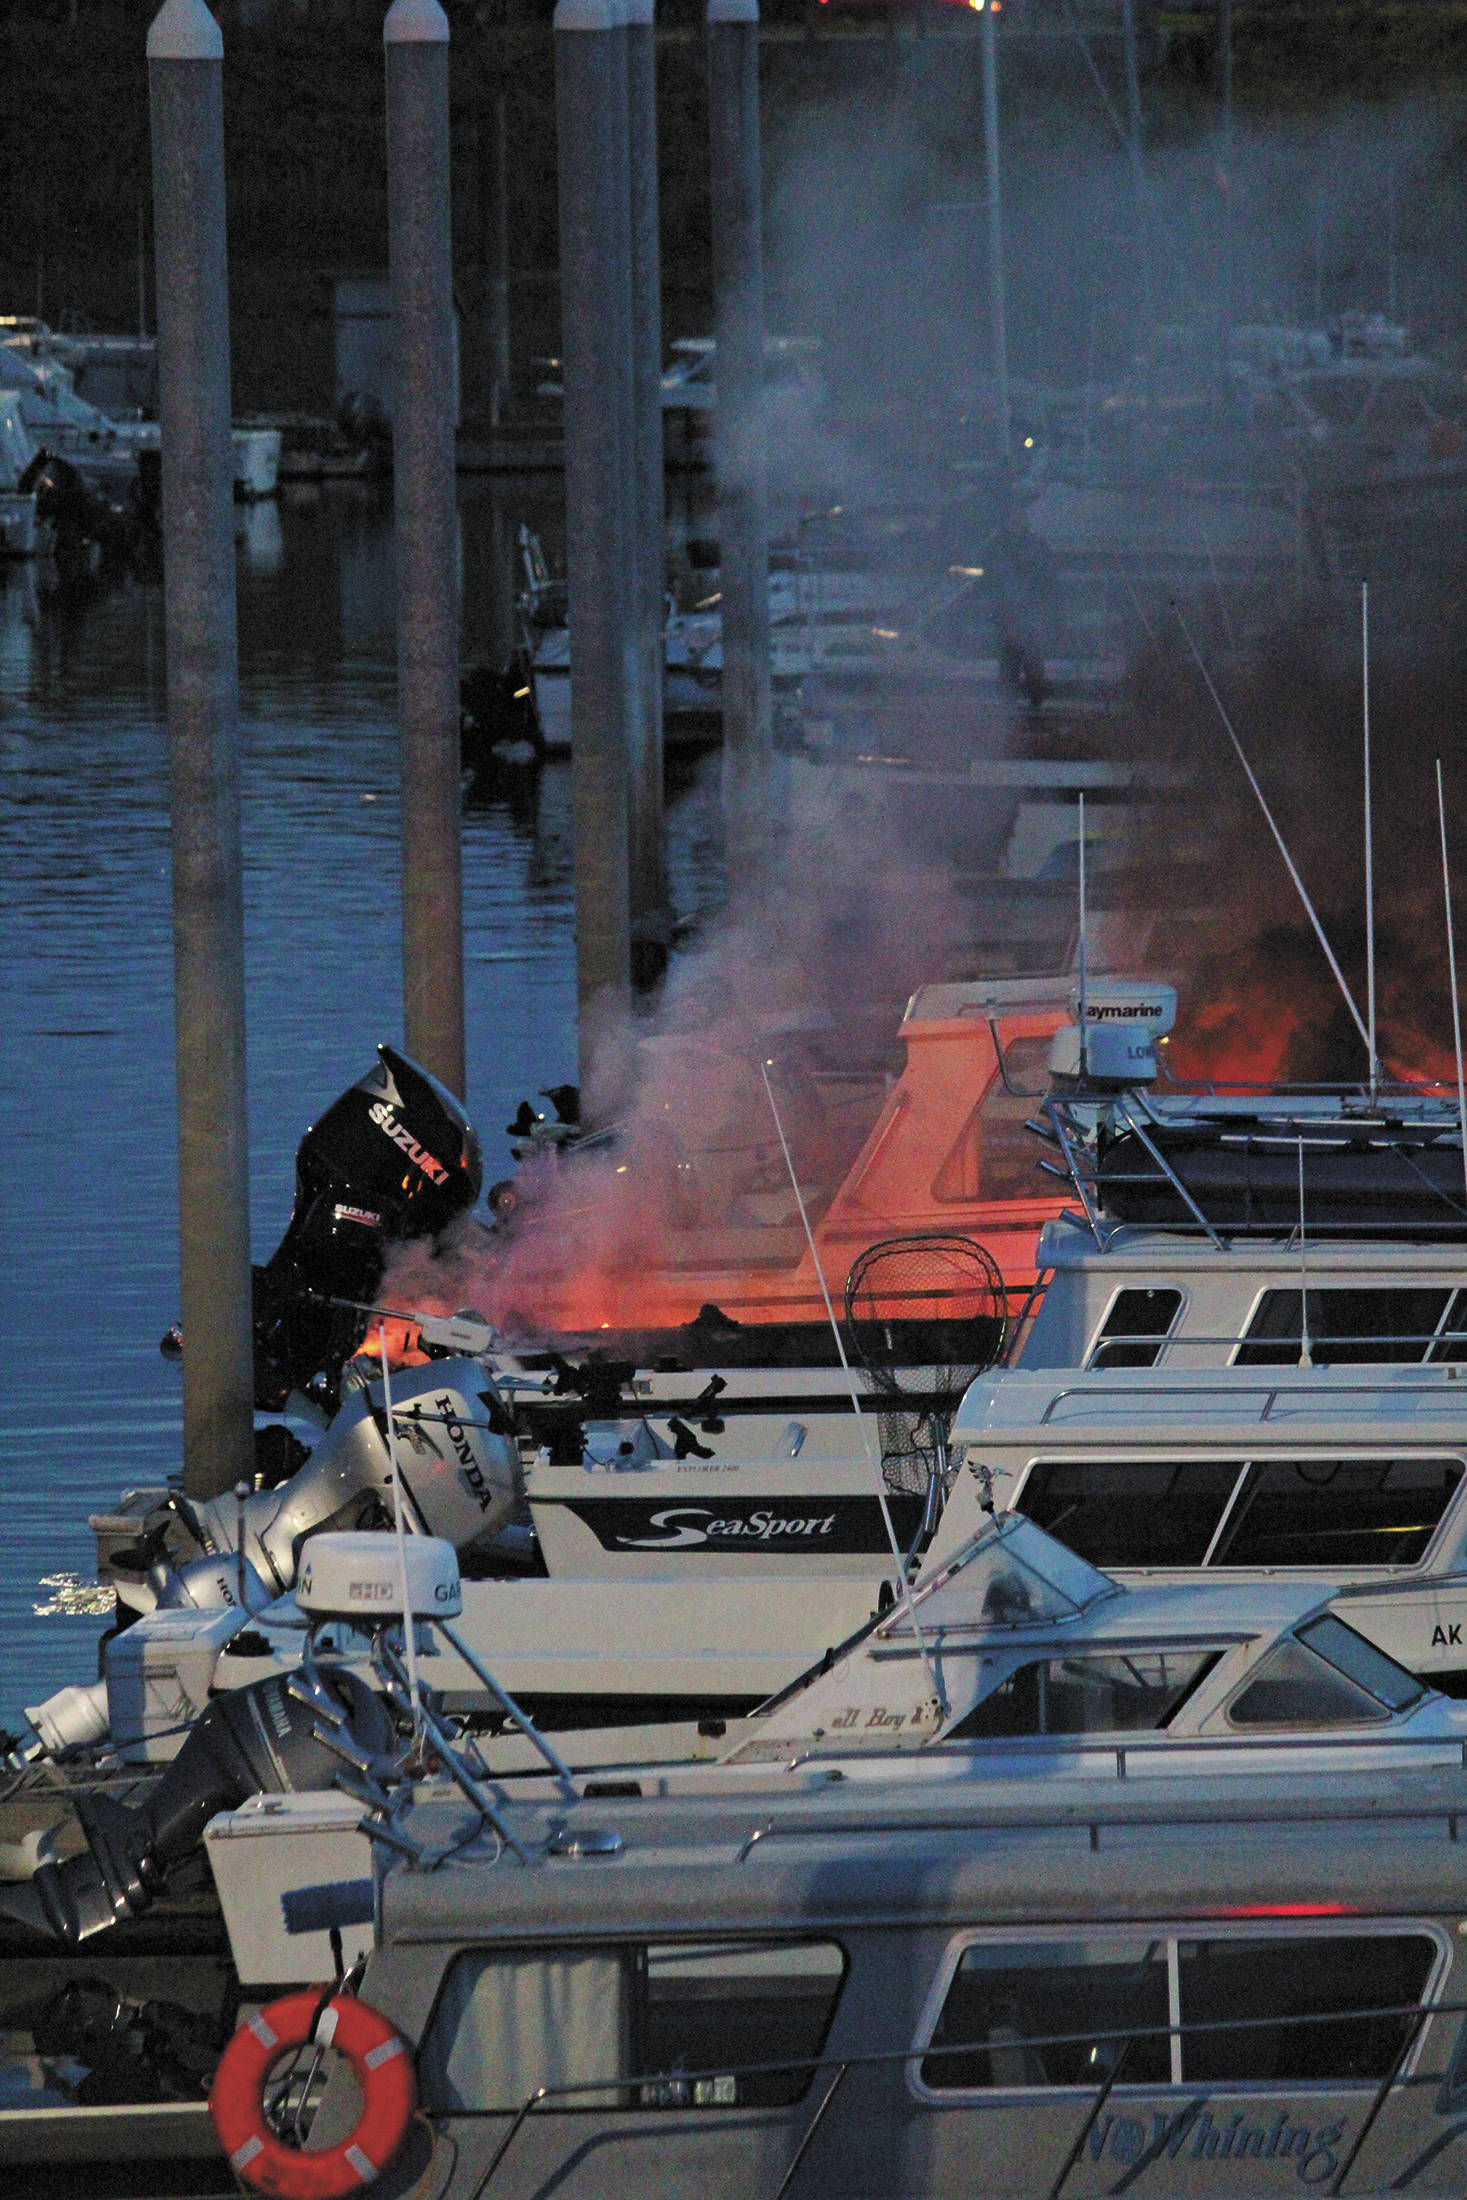 Flames and smoke rise from a 32-foot fiberglass boat docked in the Homer Harbor on the evening of Friday, Sept. 11, 2020 in Homer, Alaska. No one was harmed and the Homer Volunteer Fire Department put out the fire. (Photo by Megan Pacer/Homer News)